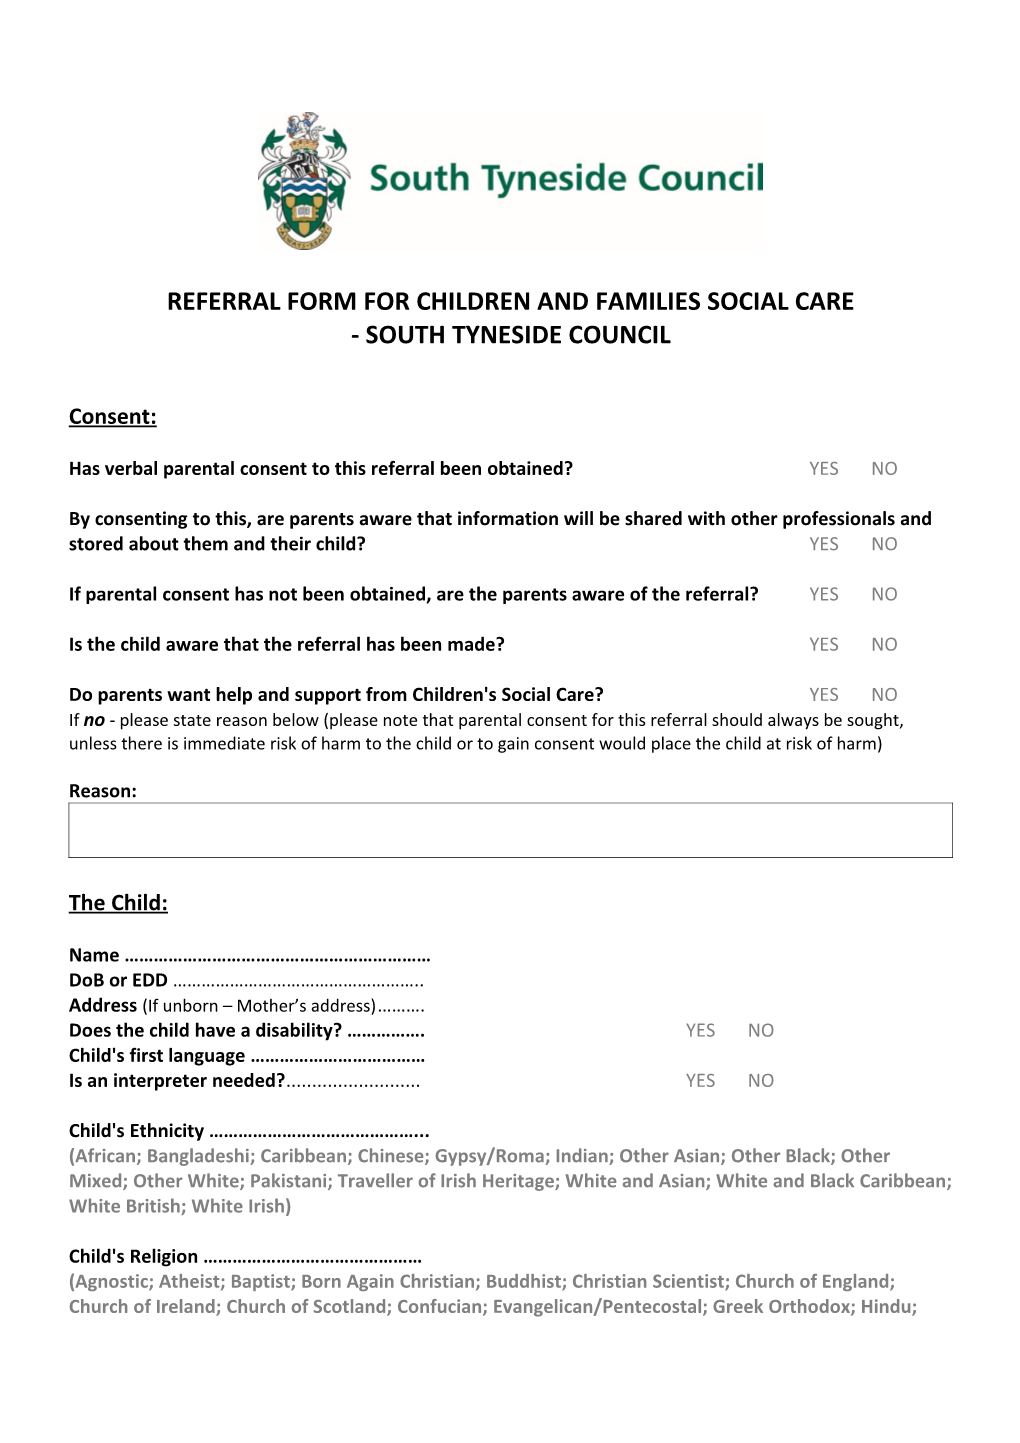 Referral Form for Children and Families Social Care